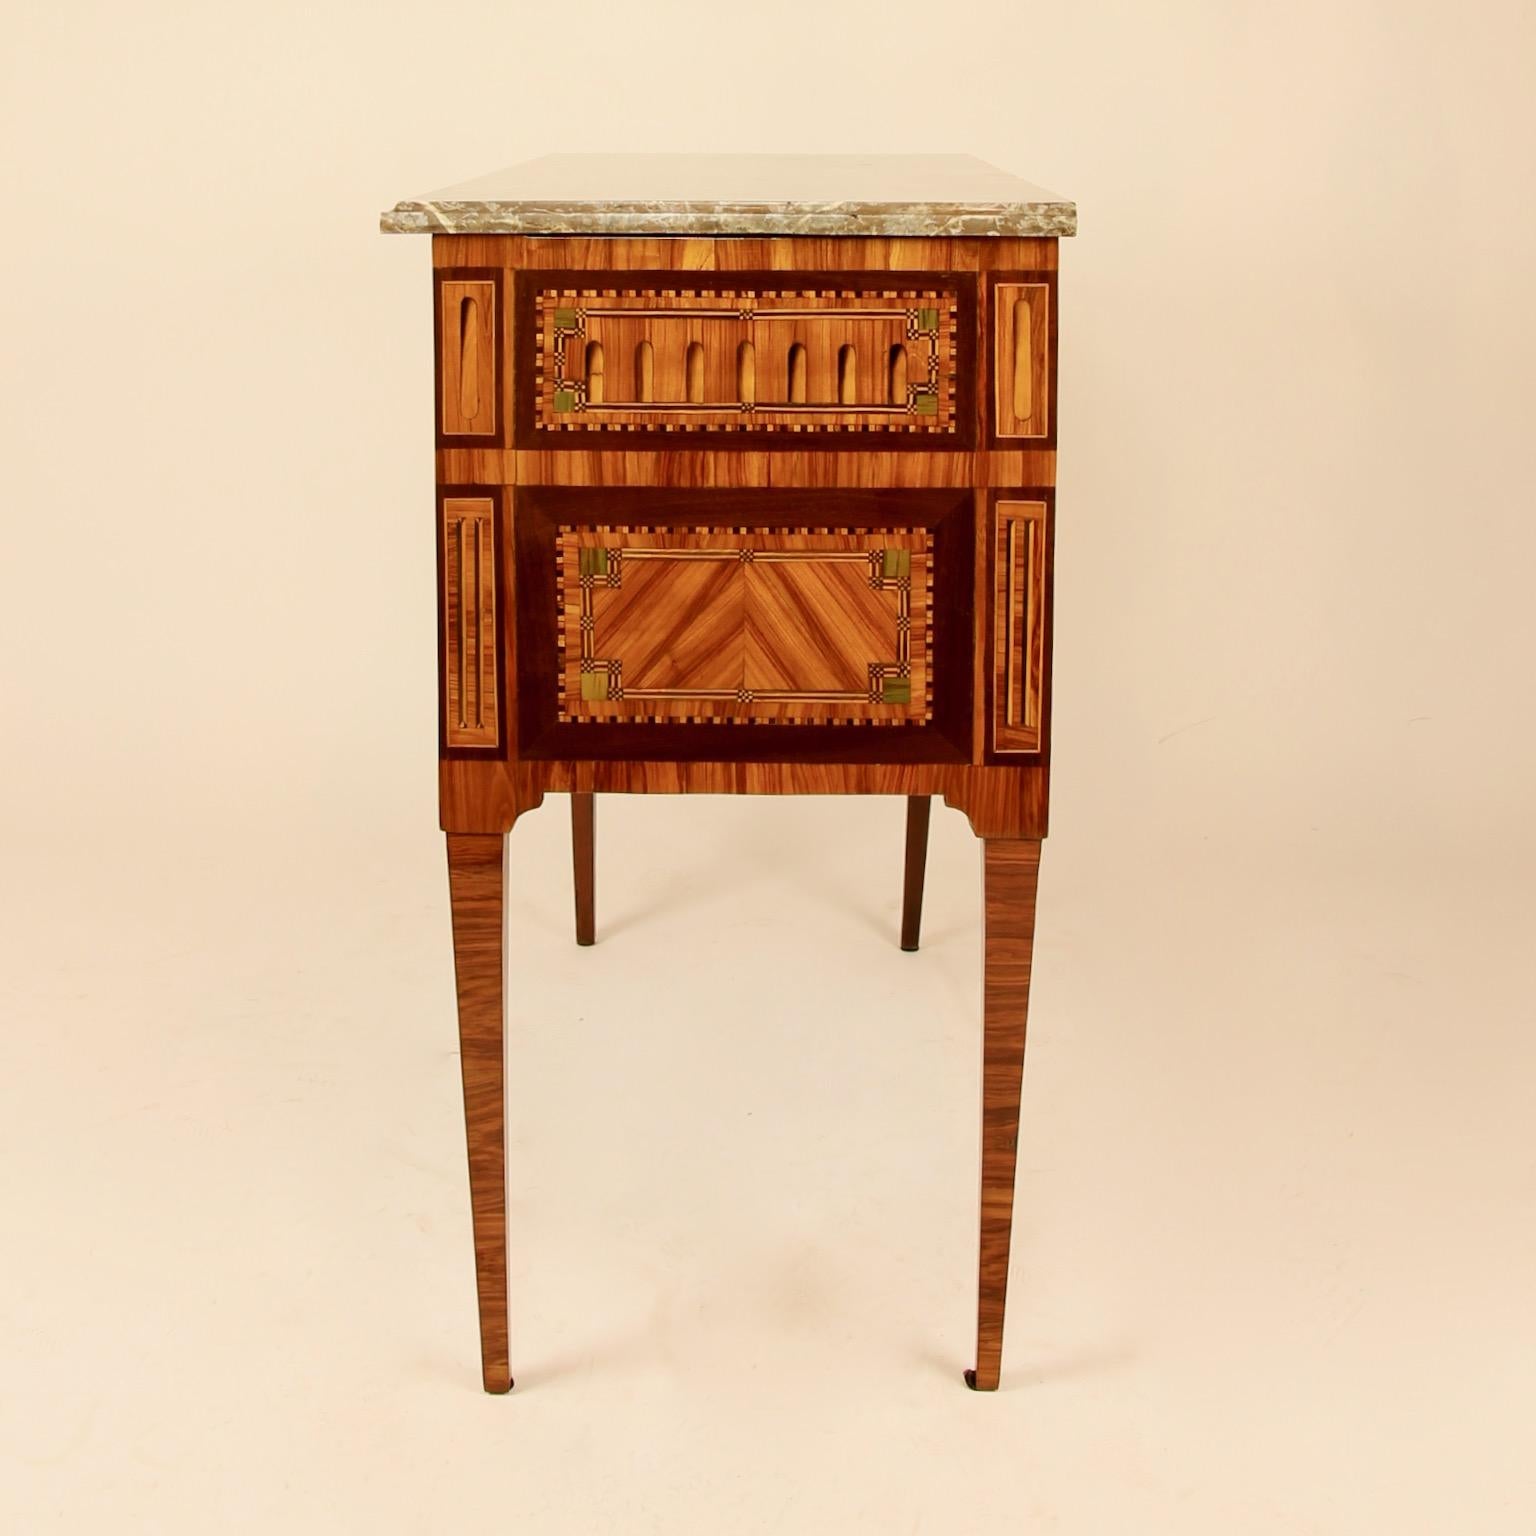 French 18th Century Louis XVI Neoclassical Marquetry Commode or Chest of Drawers